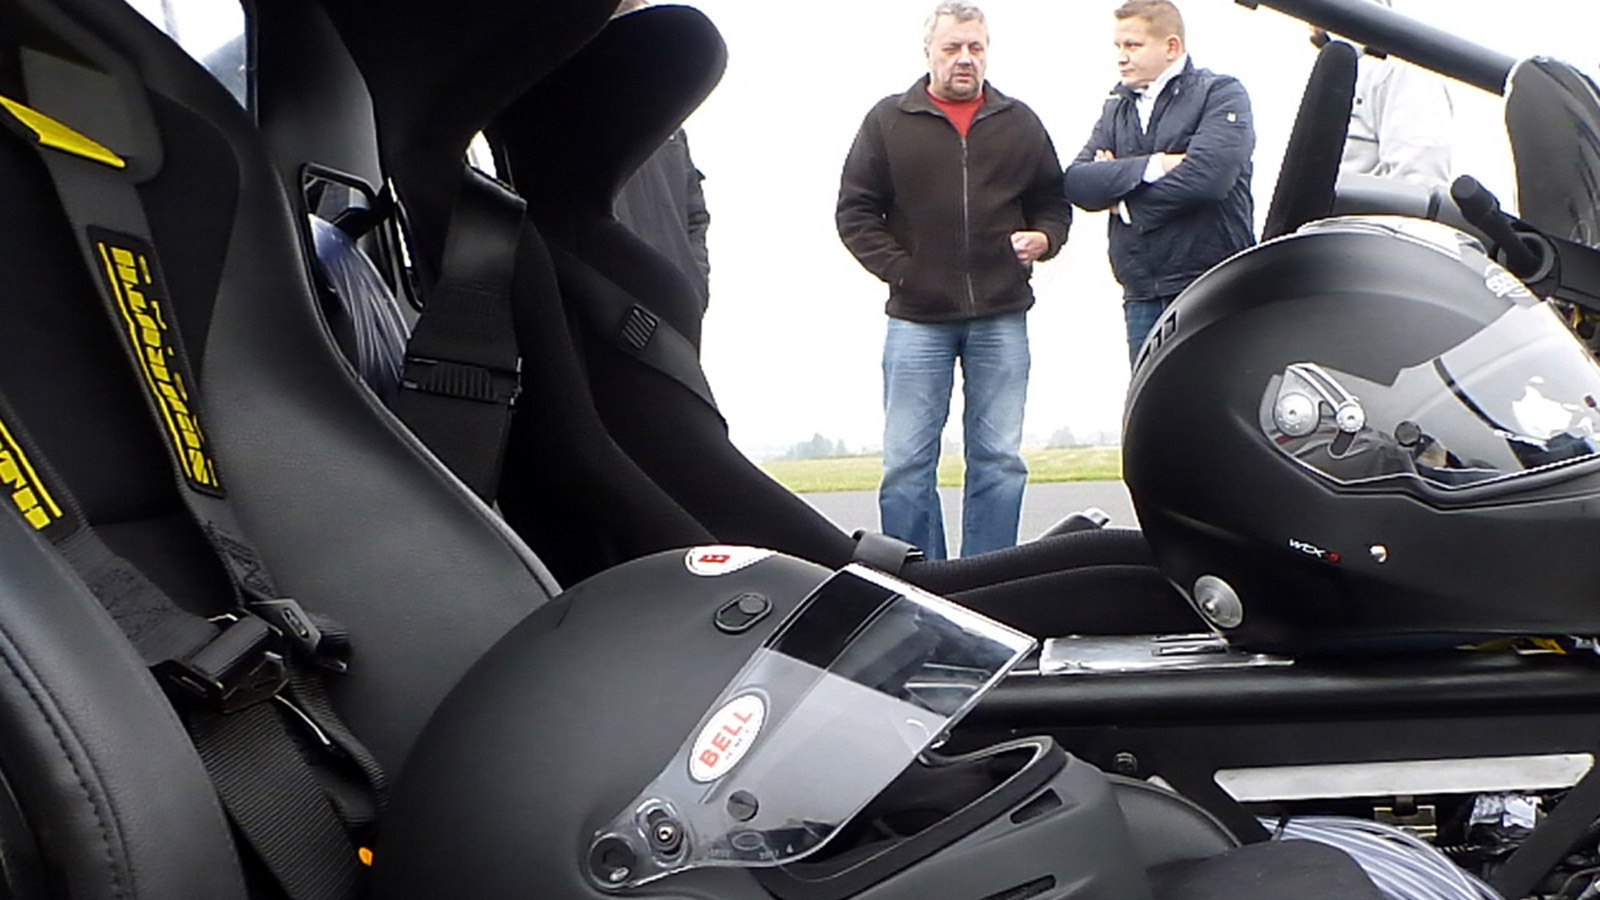 Lee Noble helps test rolling chassis for Arrinera Hussarya supercar